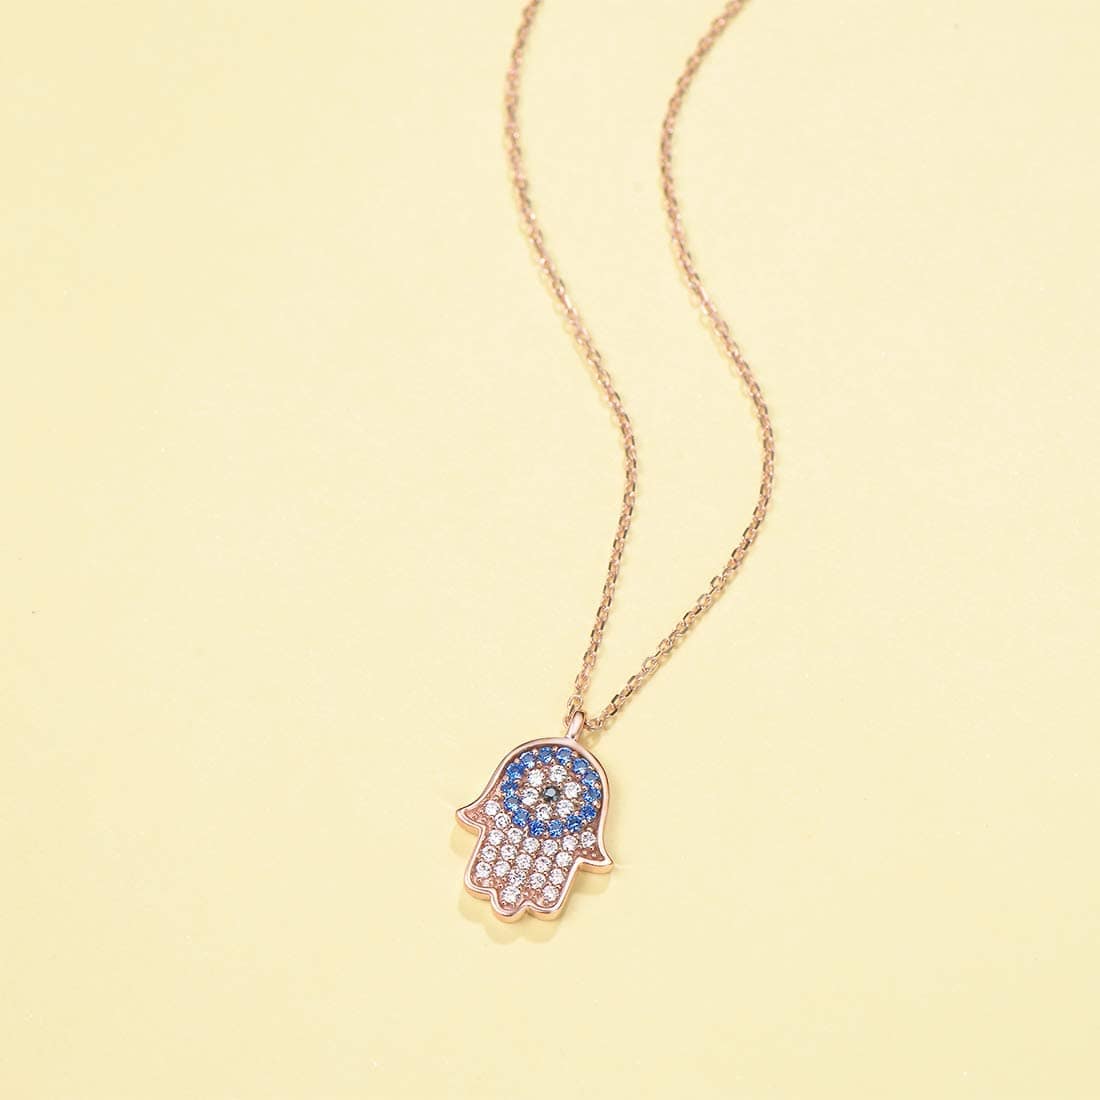 dainty hamsa pendant necklace in rose gold